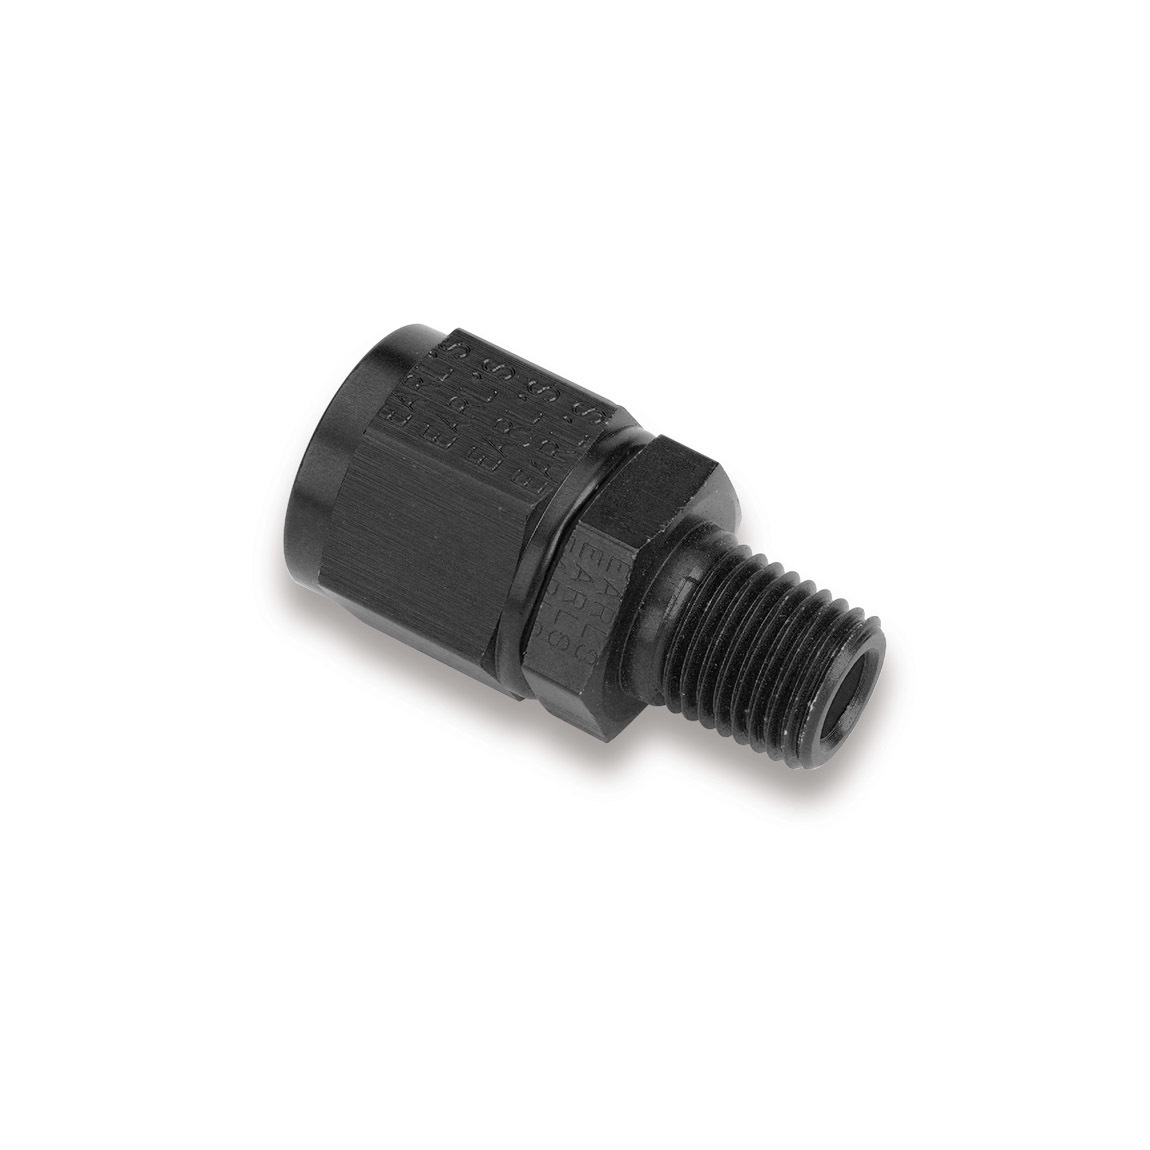 Earls AT916108ERL Fitting, Adapter, Straight, 8 AN Female Swivel to 3/8 in NPT Male, Aluminum, Black Anodized, Each